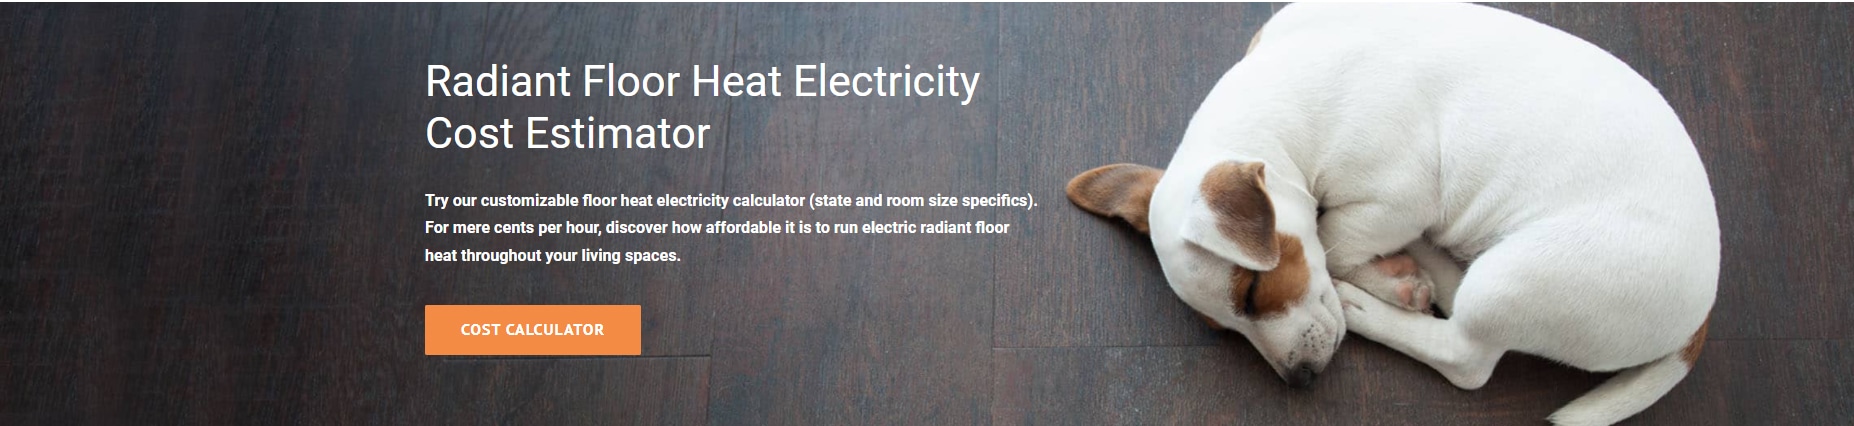 Gold-Heat-cost-calculator-for-electricity-running-electric-radiant-floor-heat